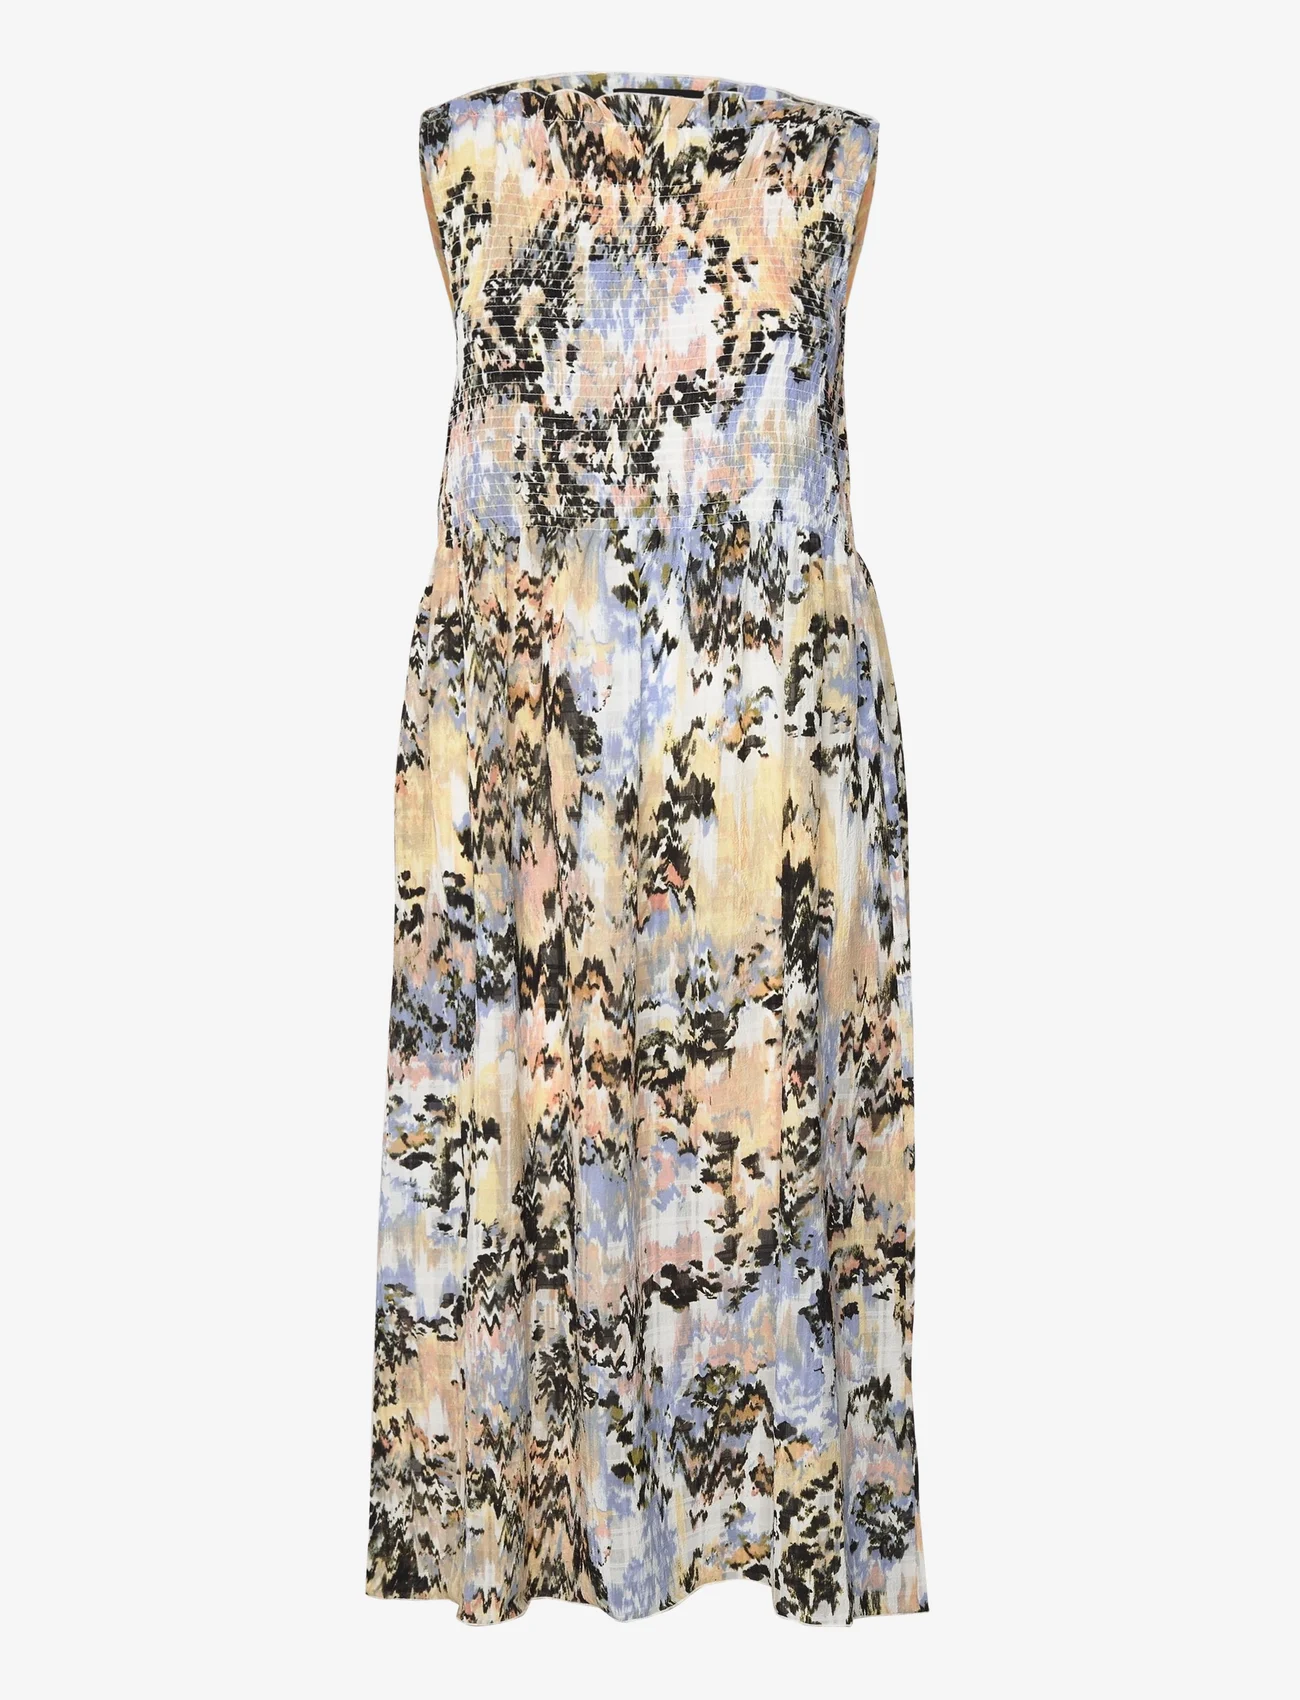 Soaked in Luxury - SLOlympia Dress - maxi kjoler - parsnip abstract print - 0